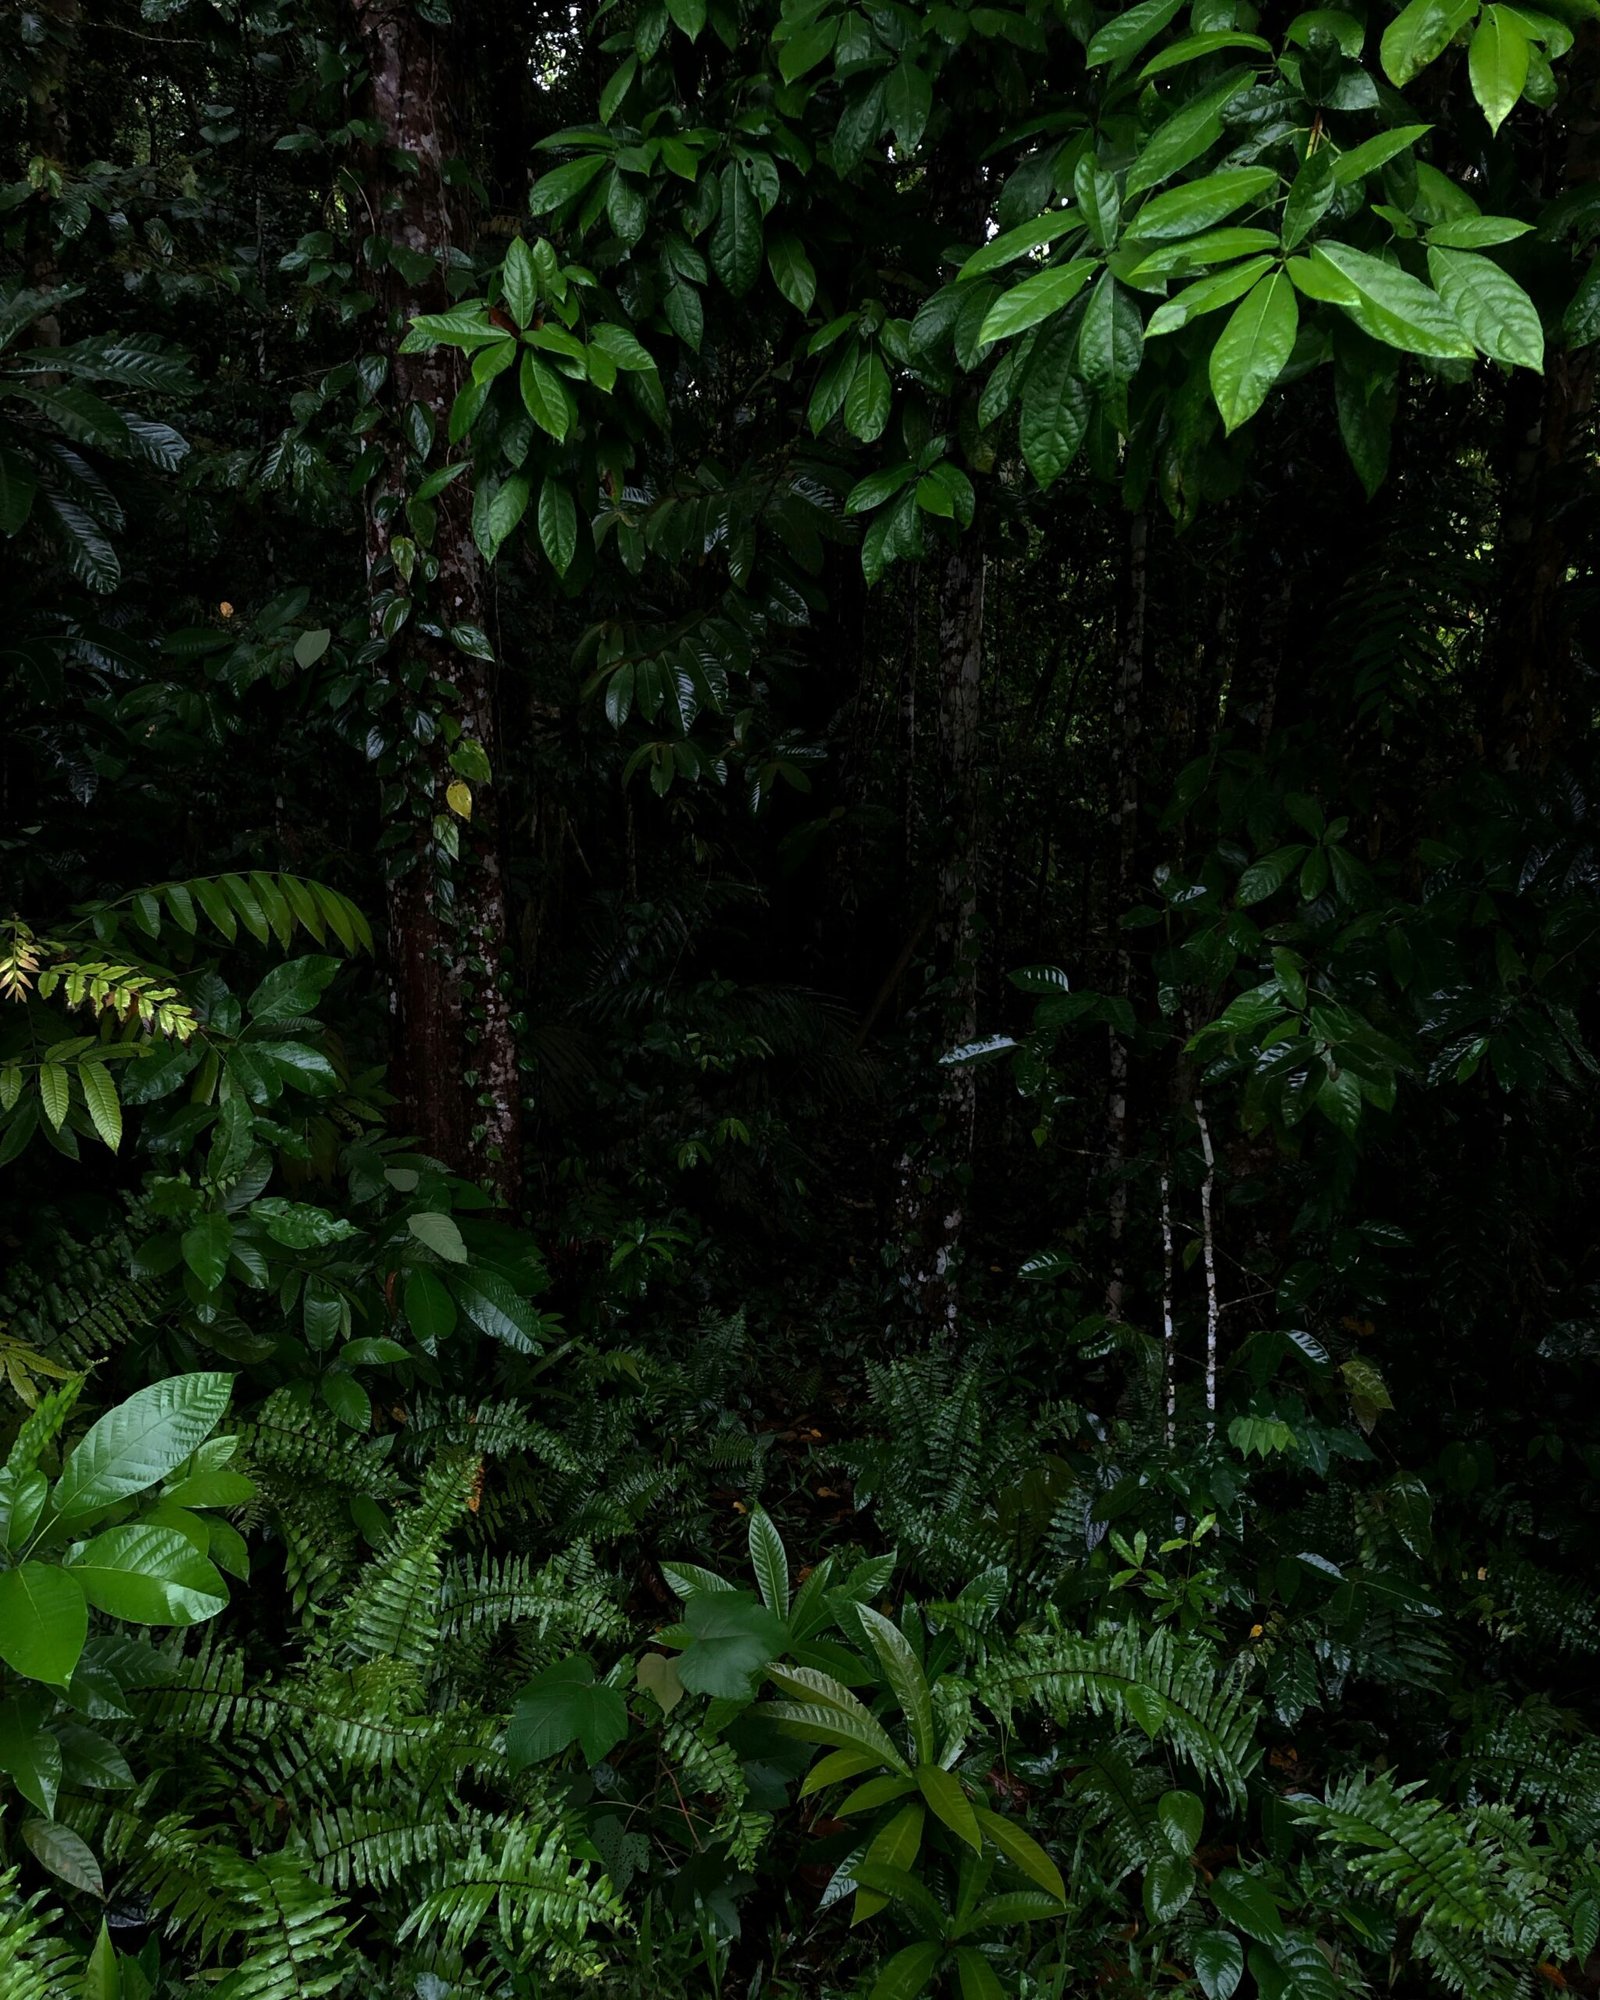 The Enchanting New Guinea Rainforest: A Haven of Biodiversity and Natural Beauty